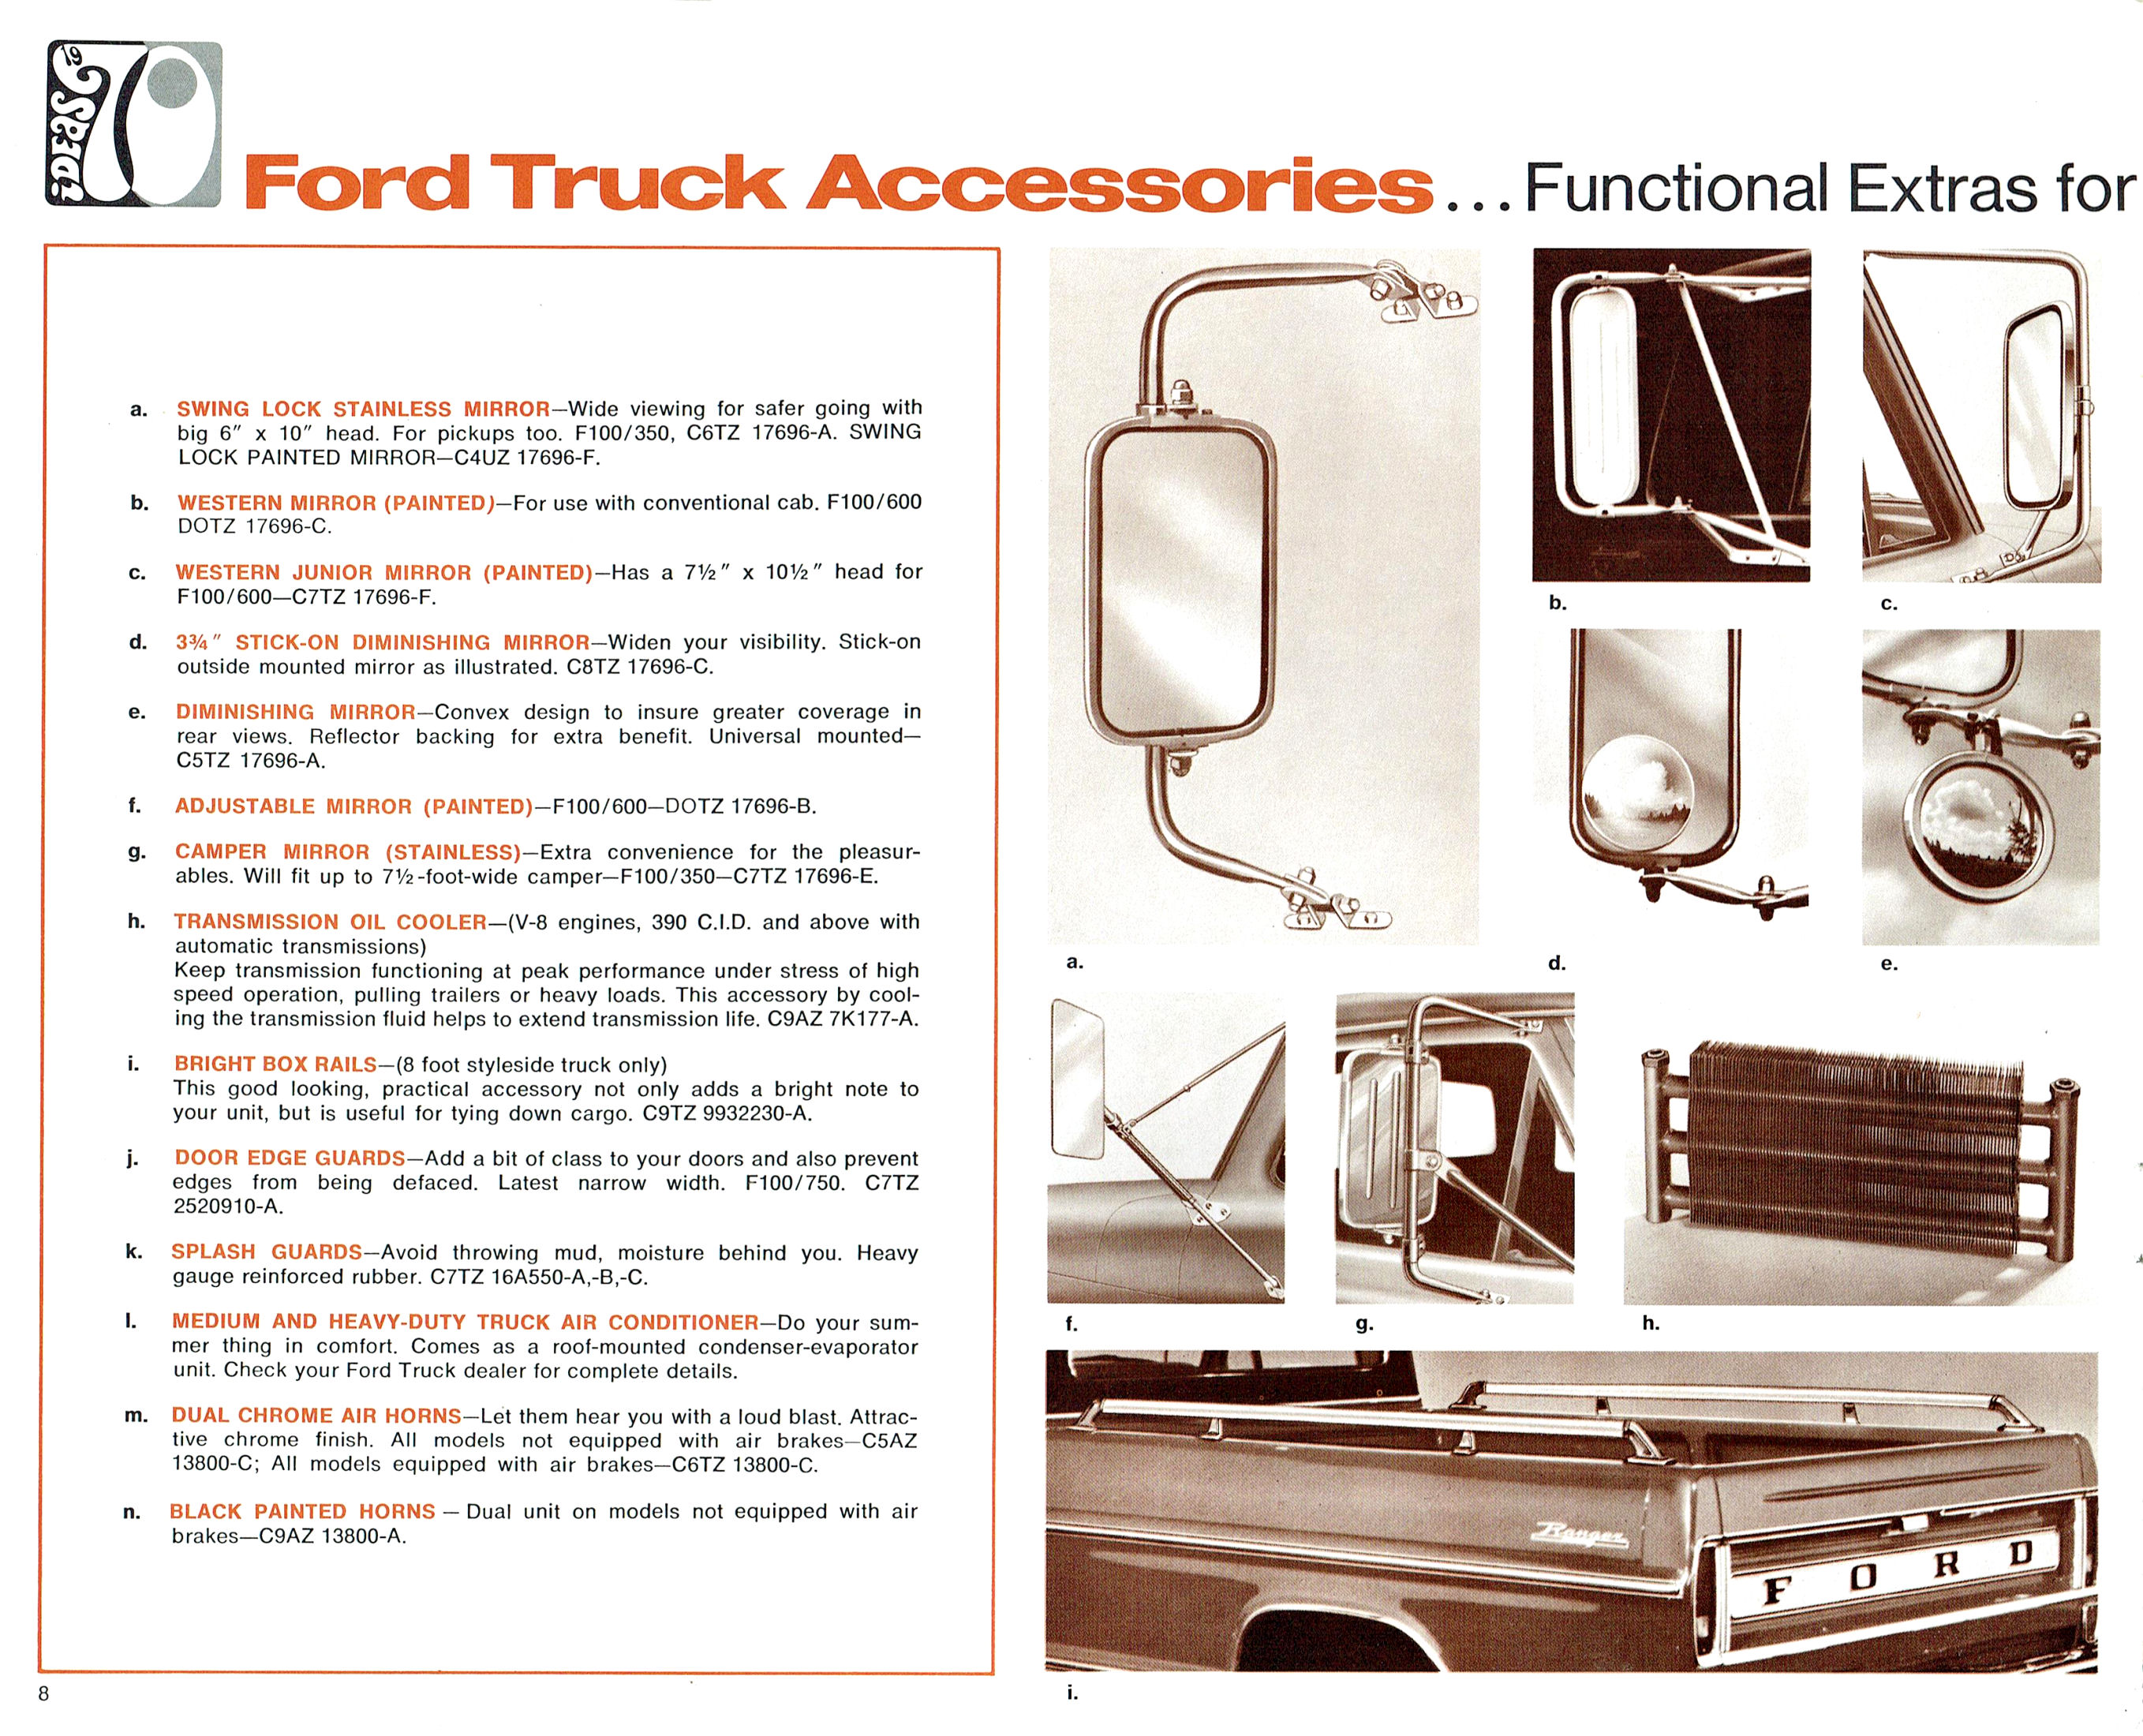 1970 Ford Truck Accessories-08